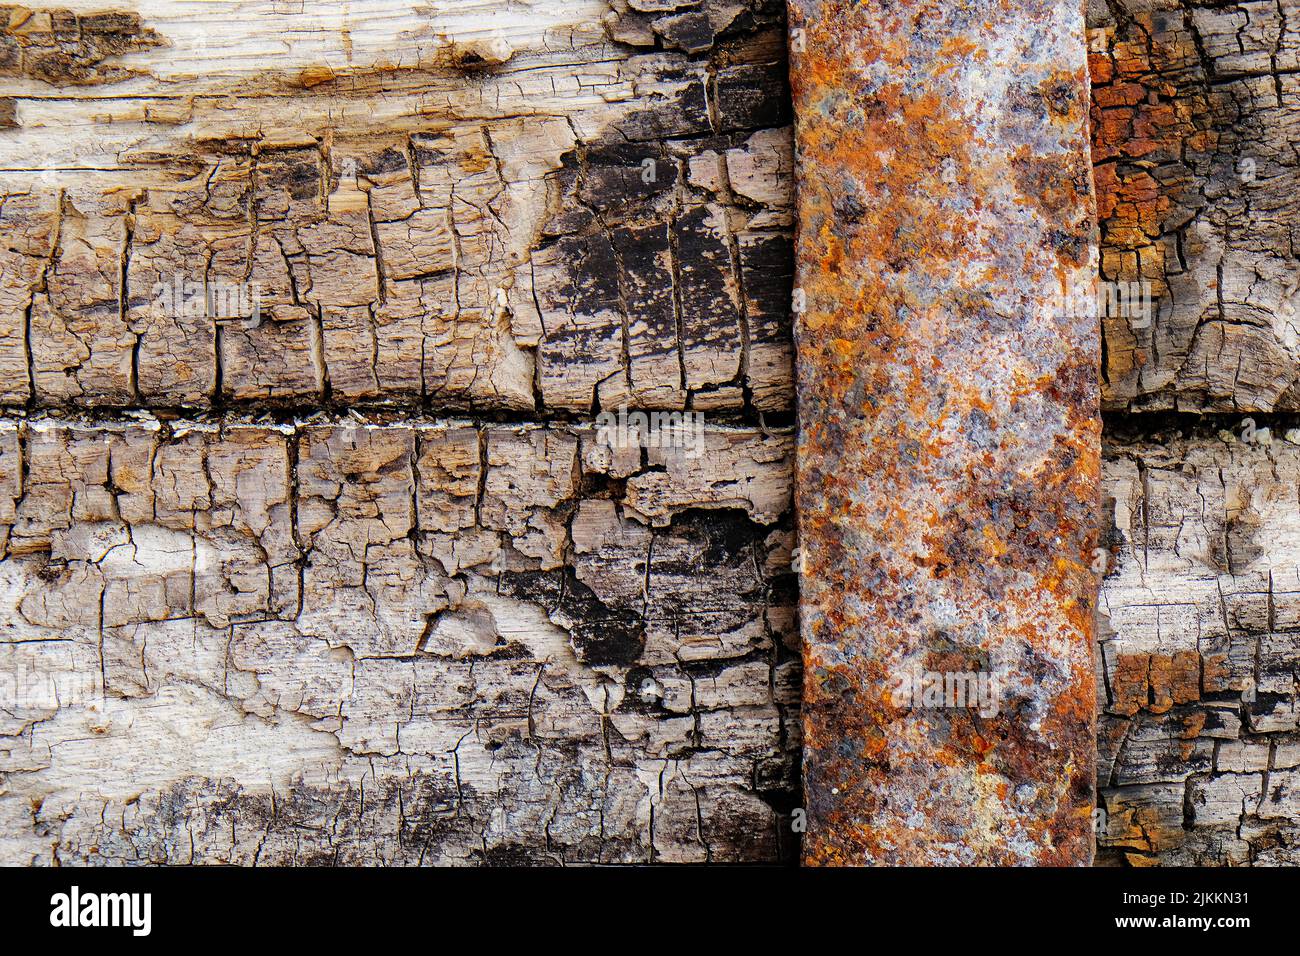 A closeup of the rusty iron on the aged deteriorated wooden door. Stock Photo